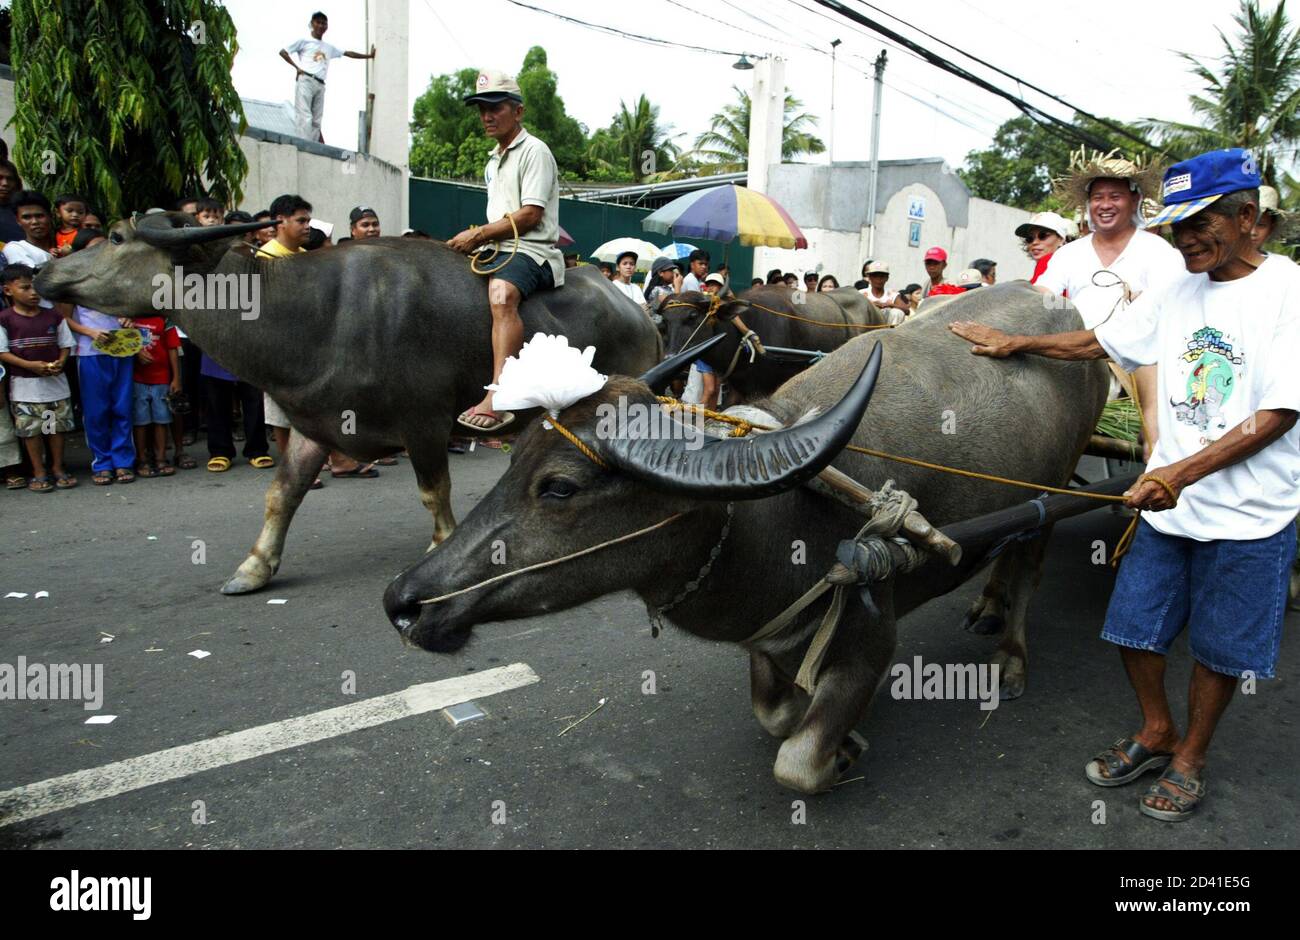 A Filipino farmer coaxes his buffalo locally known as into kneeling along the road in the town Pulilan in Bulacan province north of Manila May 14, 2003. The farmers